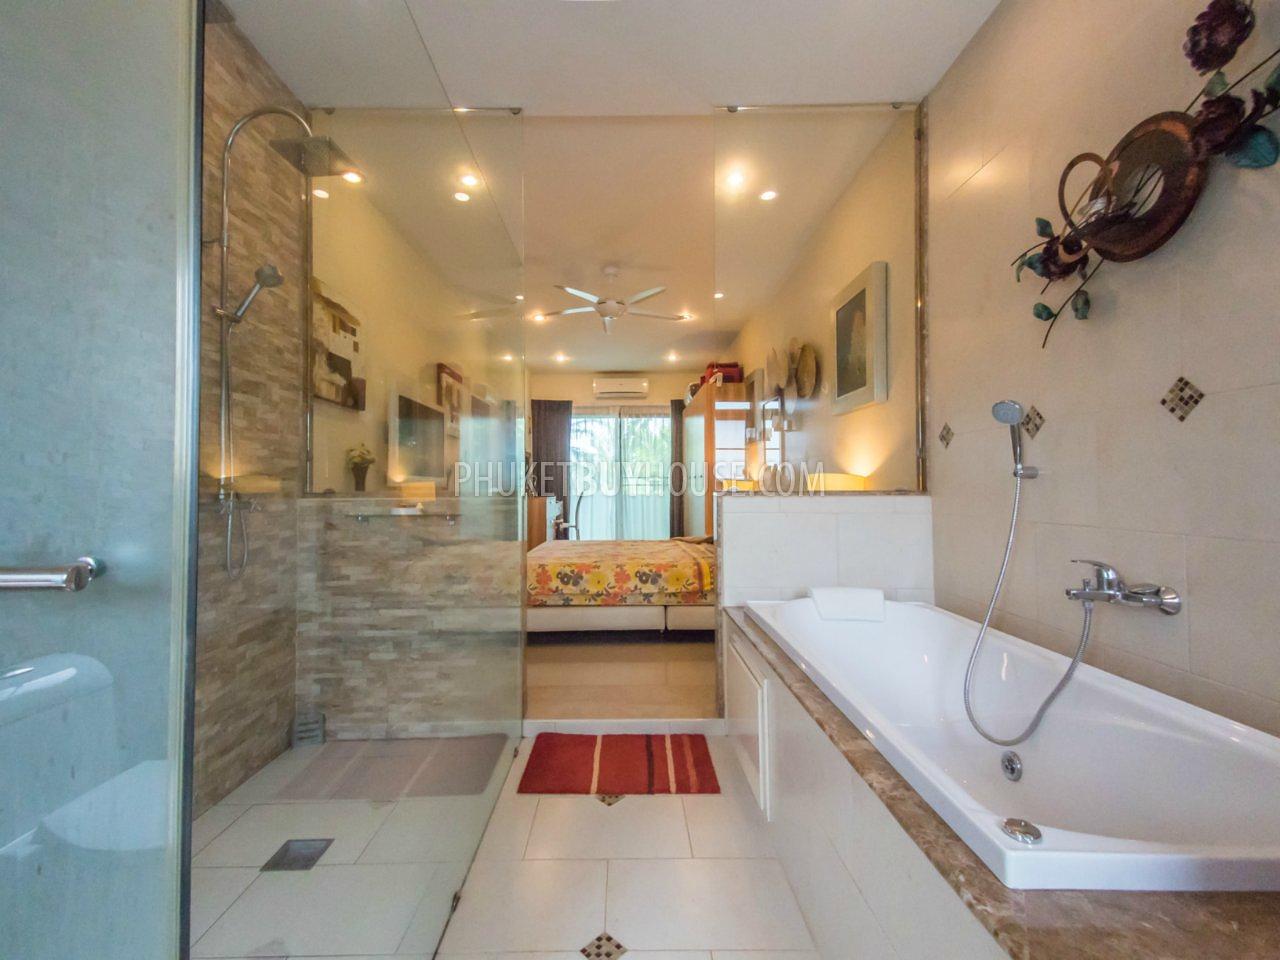 RAW6092: Beautiful 3 (up to 5) bedrooms Villa in Rawai with office and gym. Photo #39